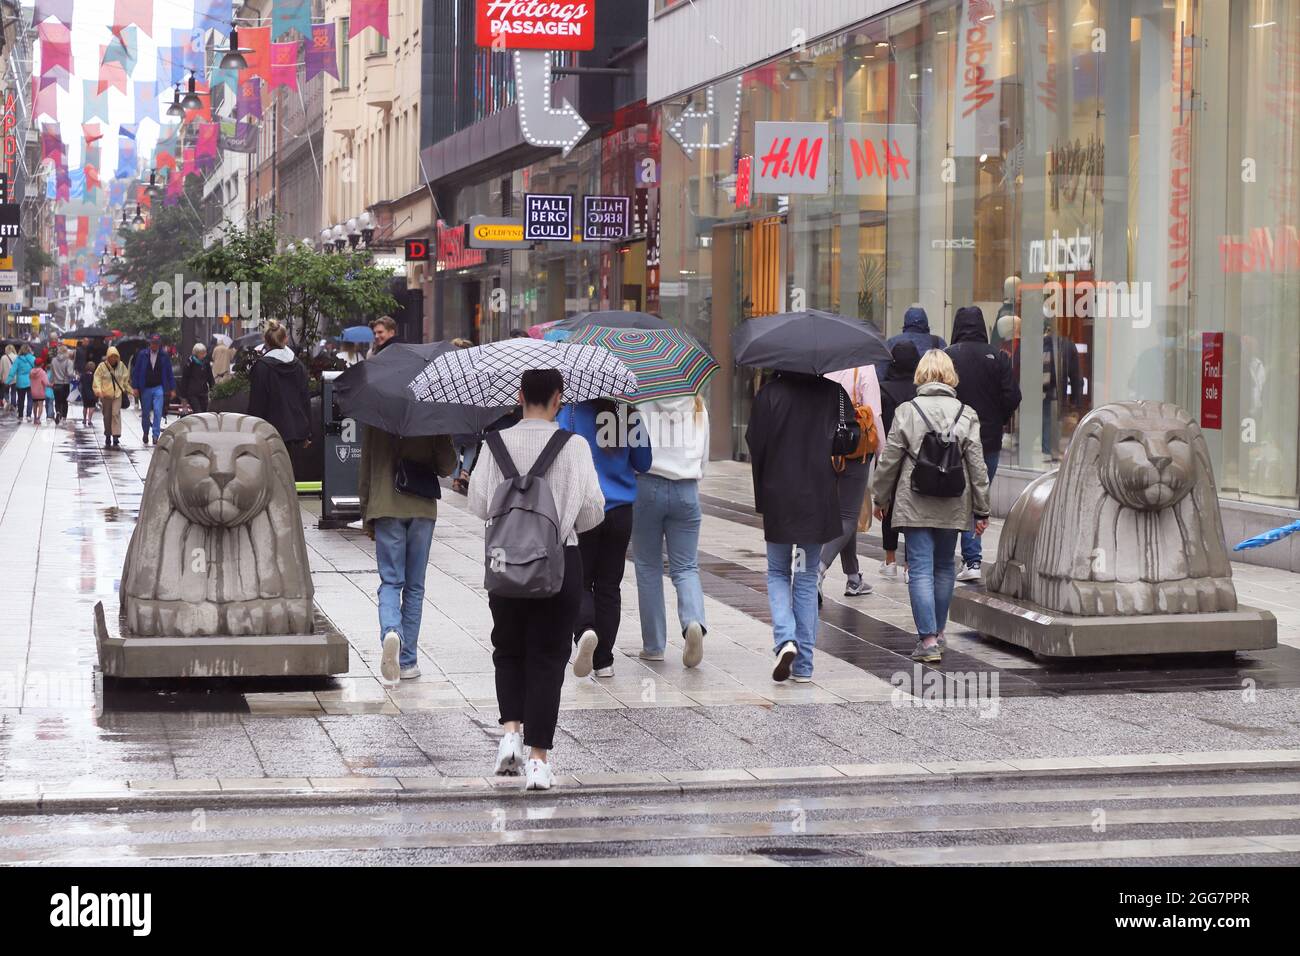 Stockholm, Sweden - August 16, 2021: People at the pedestrian street Drottninggatan in the downtown district with umbrellas during rain. Stock Photo